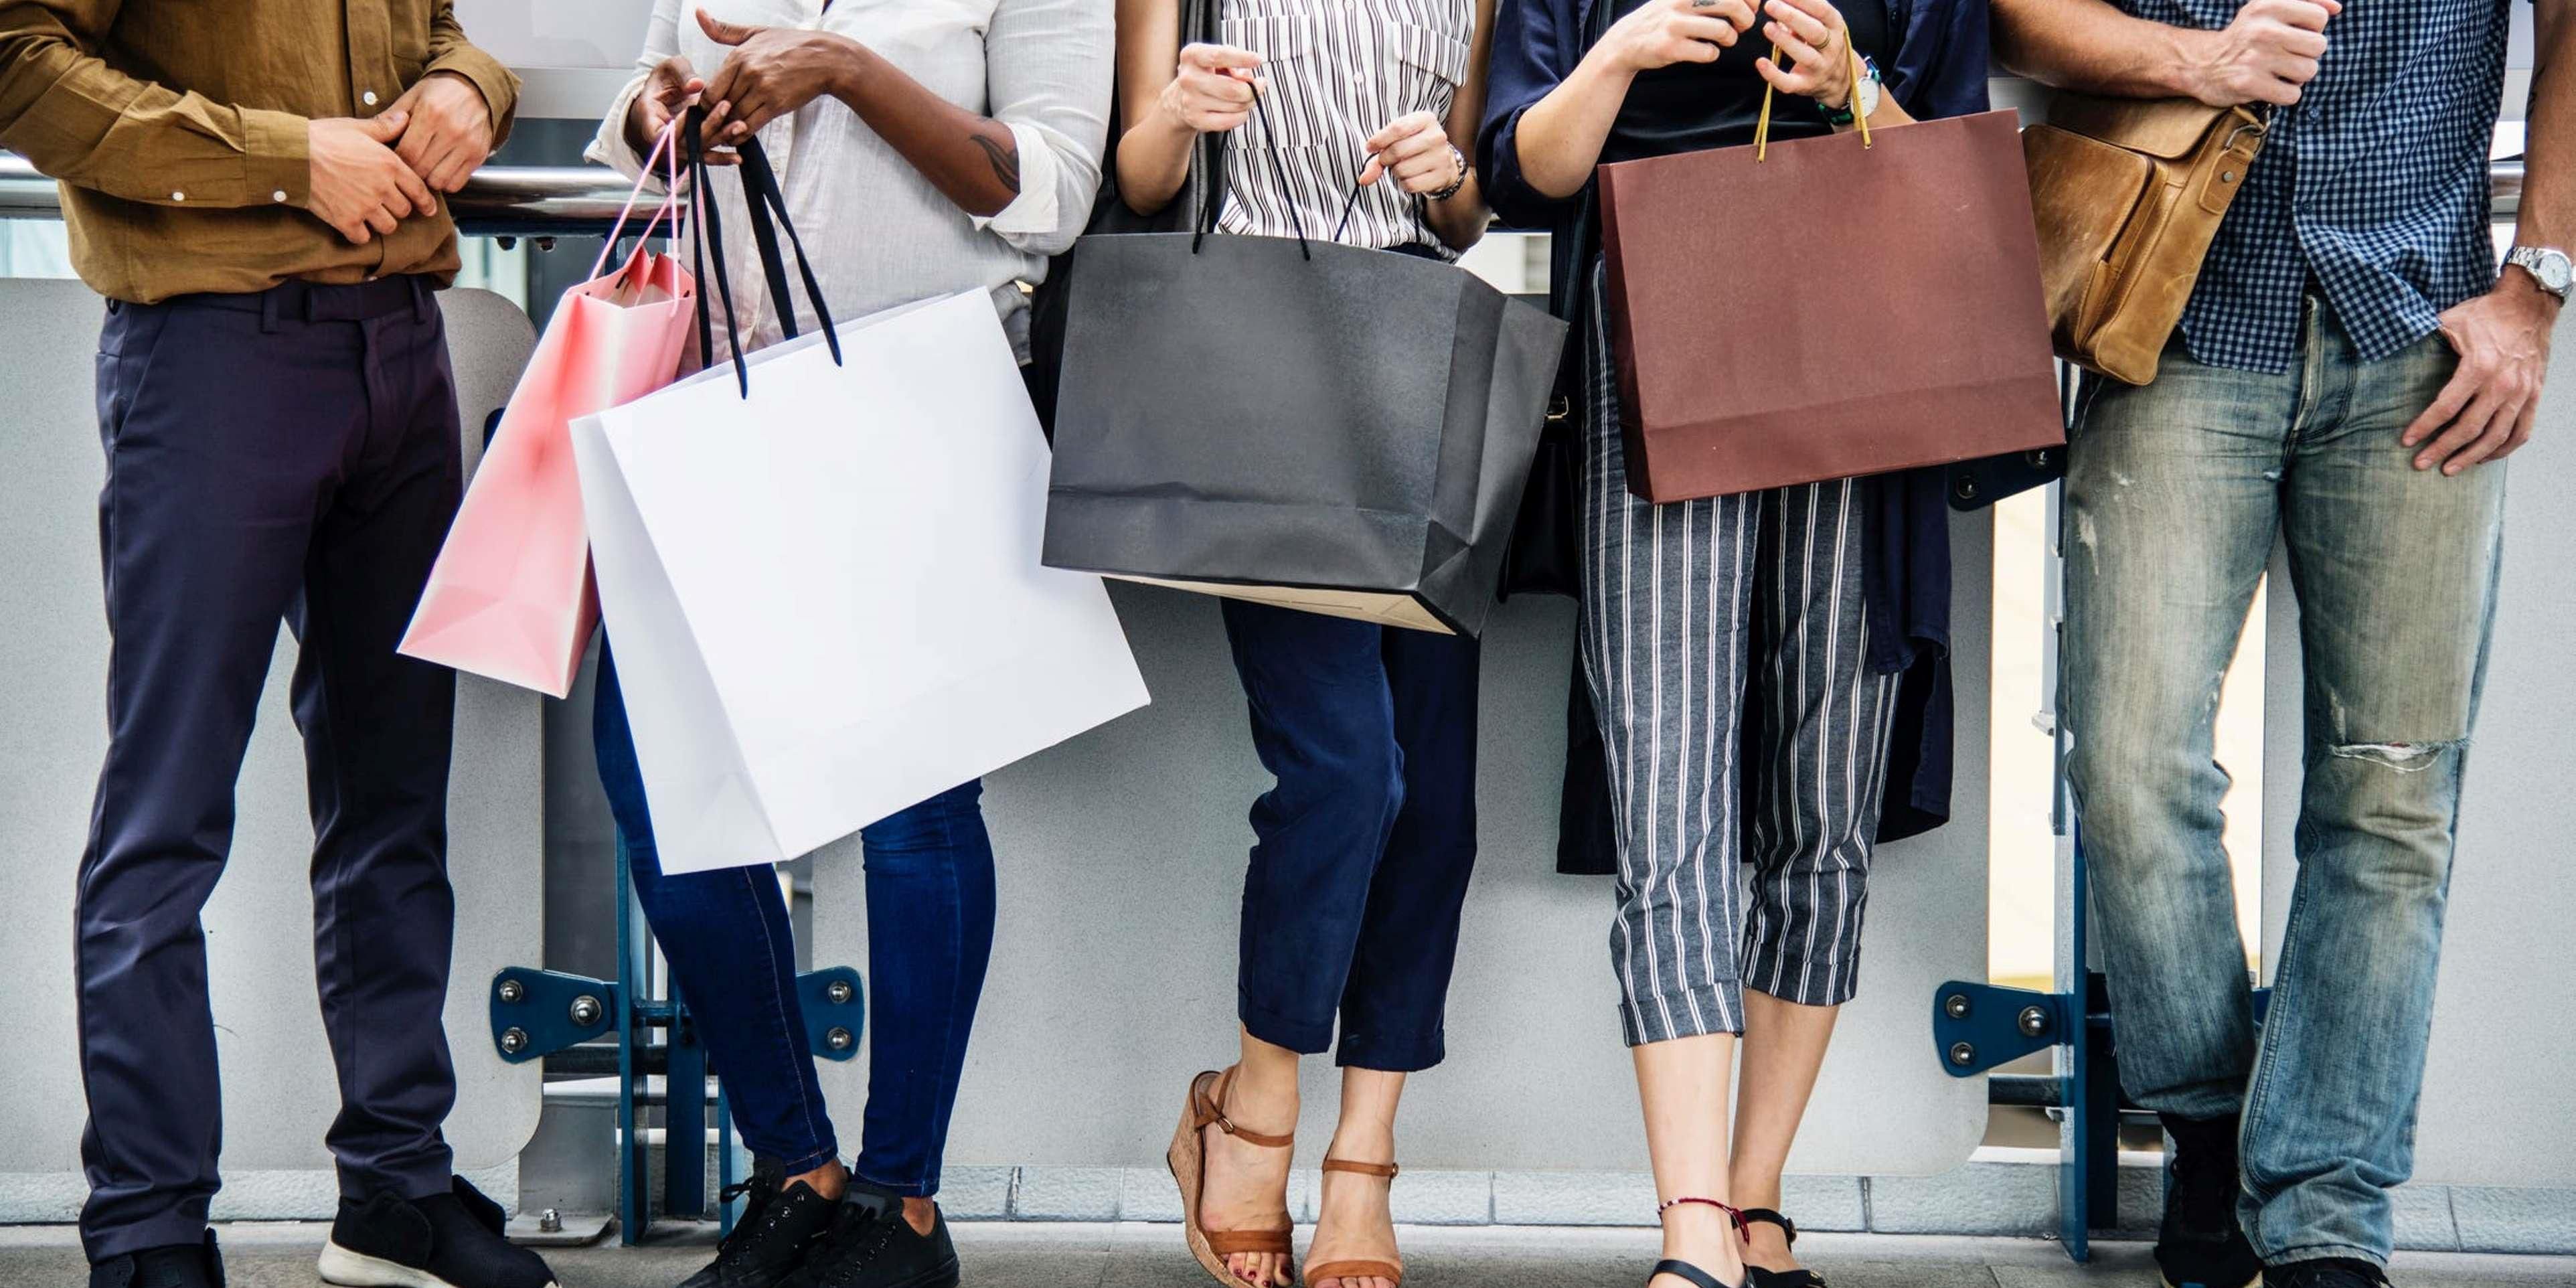 Tanger Outlet Mall  boasts more than 60 retailers, including popular brands, luxury labels & designers in an outdoor  shopping center with a mini golf course.  Did we mention our hotel is only 2 blocks from all this fabulous shopping? And that we offer special pricing?Plan your spree today!